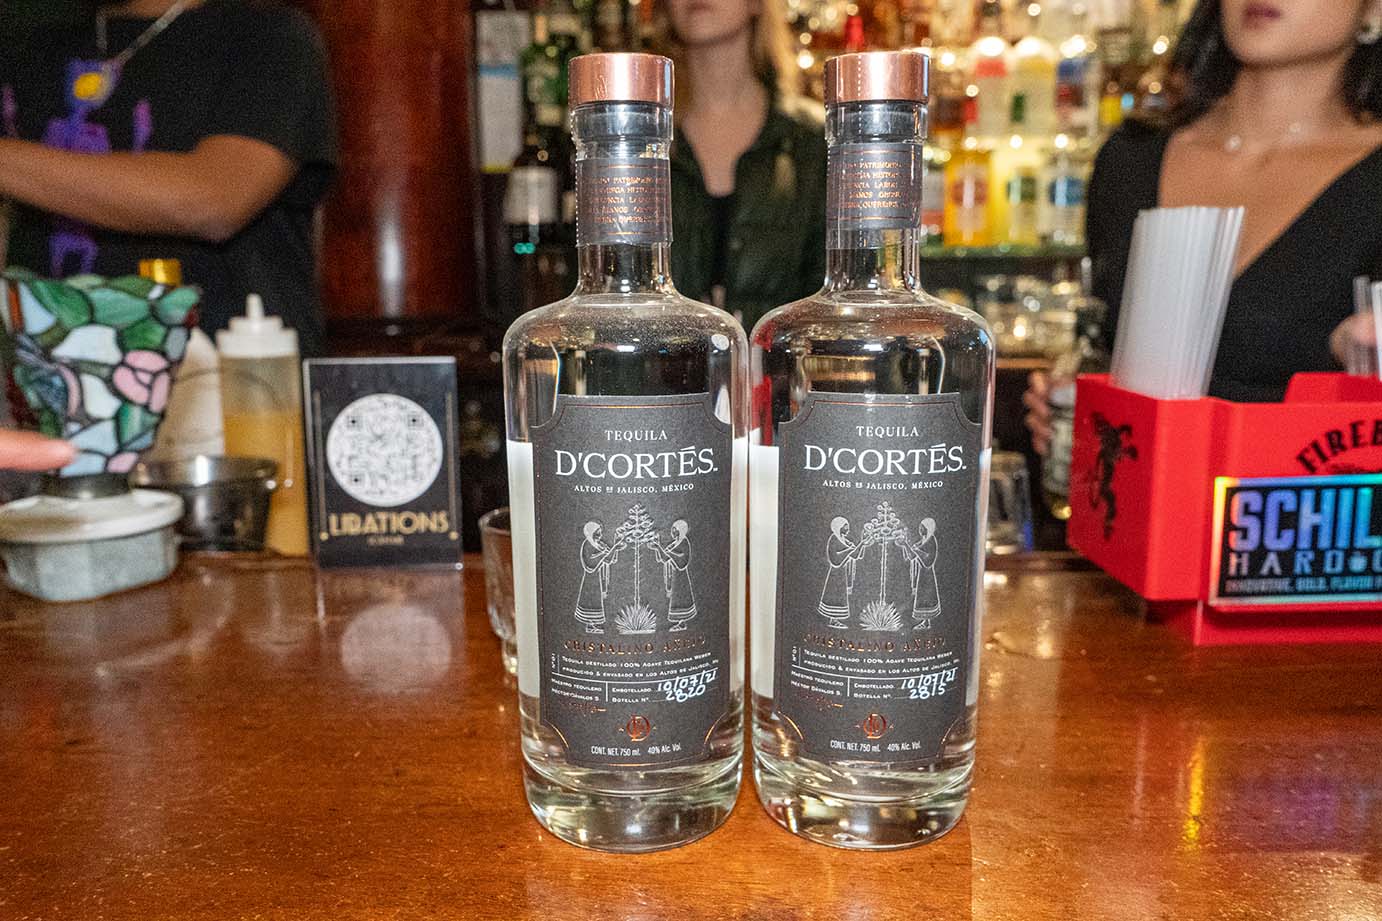 D'Cortes tequila bottles on bar counter